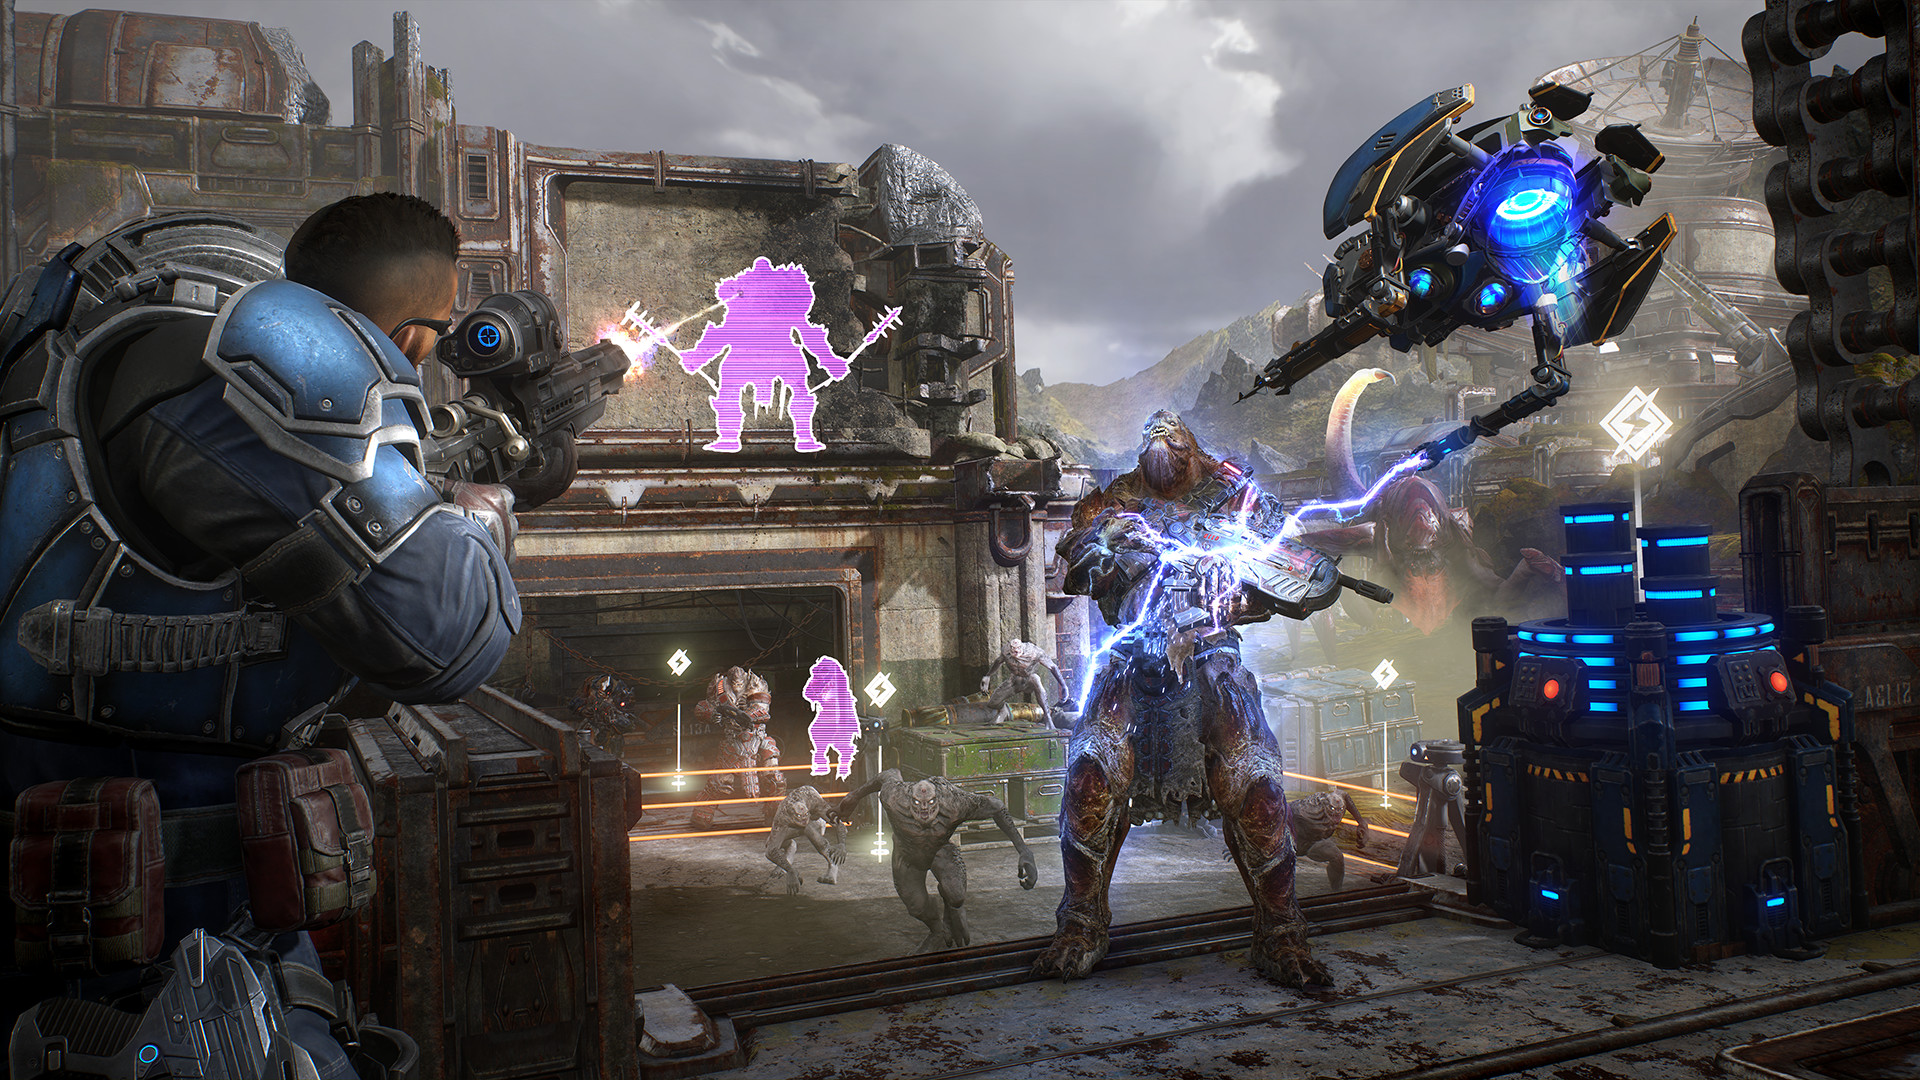 Gears 5 has a new multiplayer mode, Escape